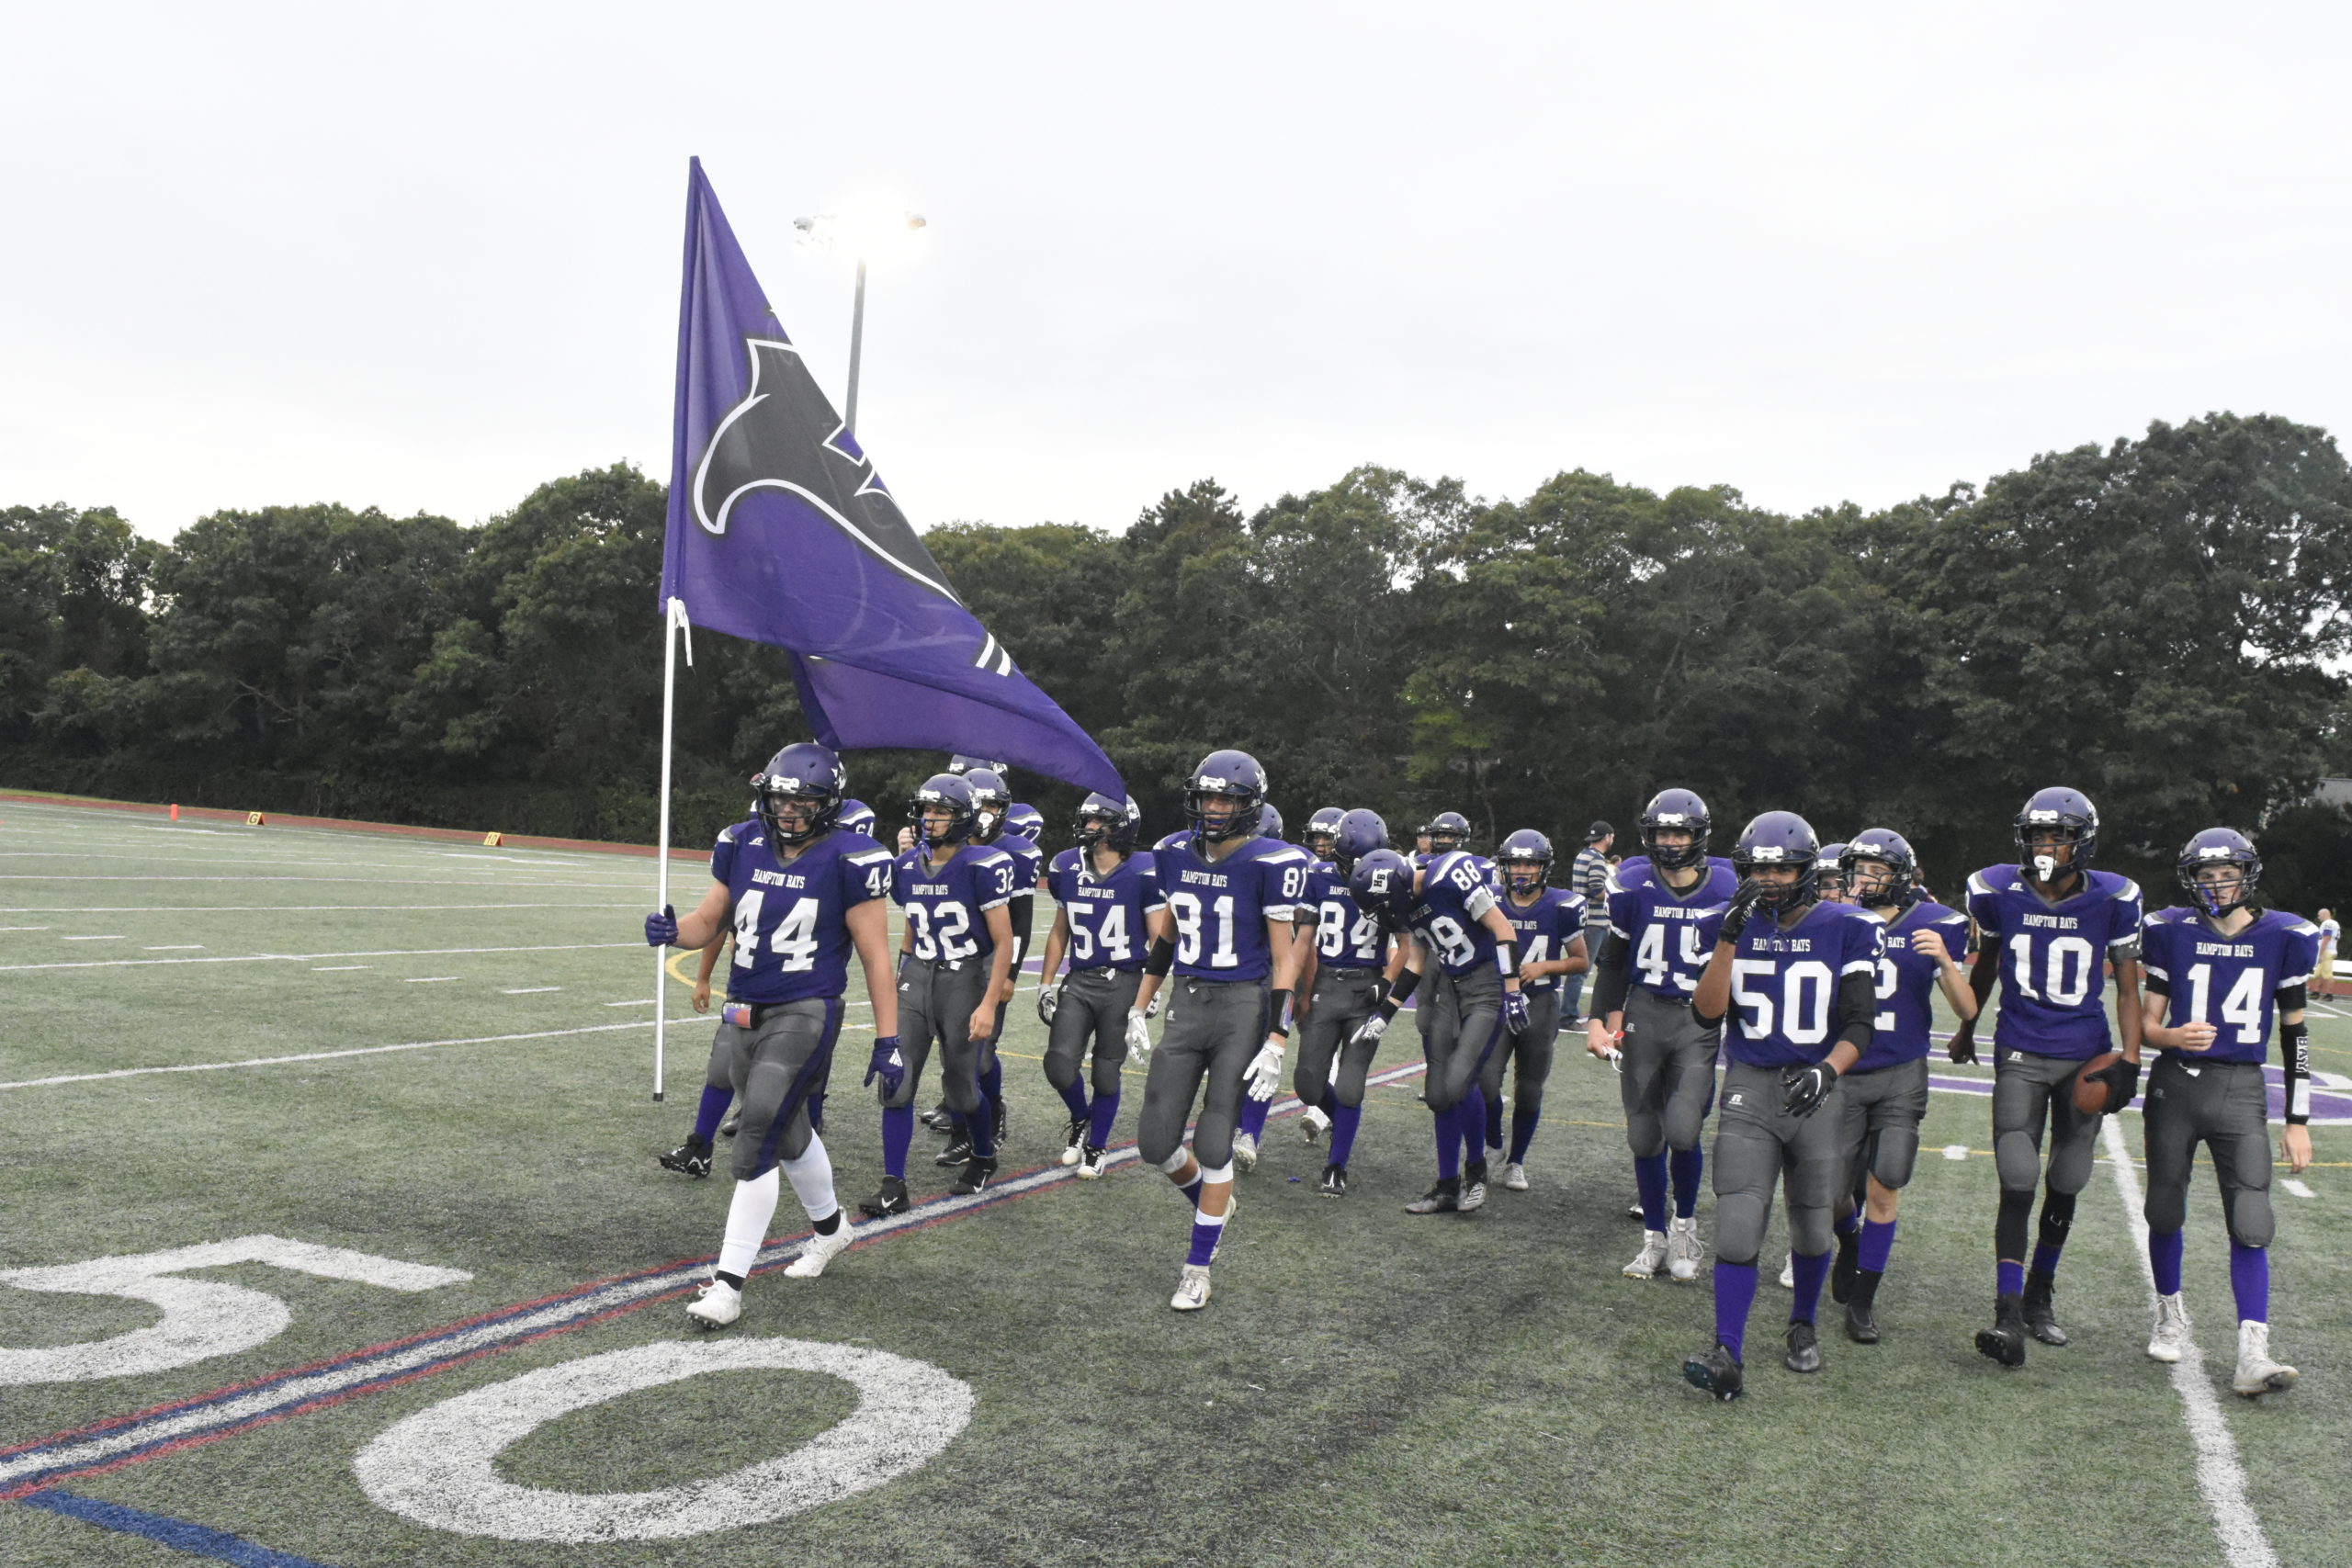 Cooper Shay led the Baymen out onto the field just before Friday's game against Greenport/Mattituck/Southold.